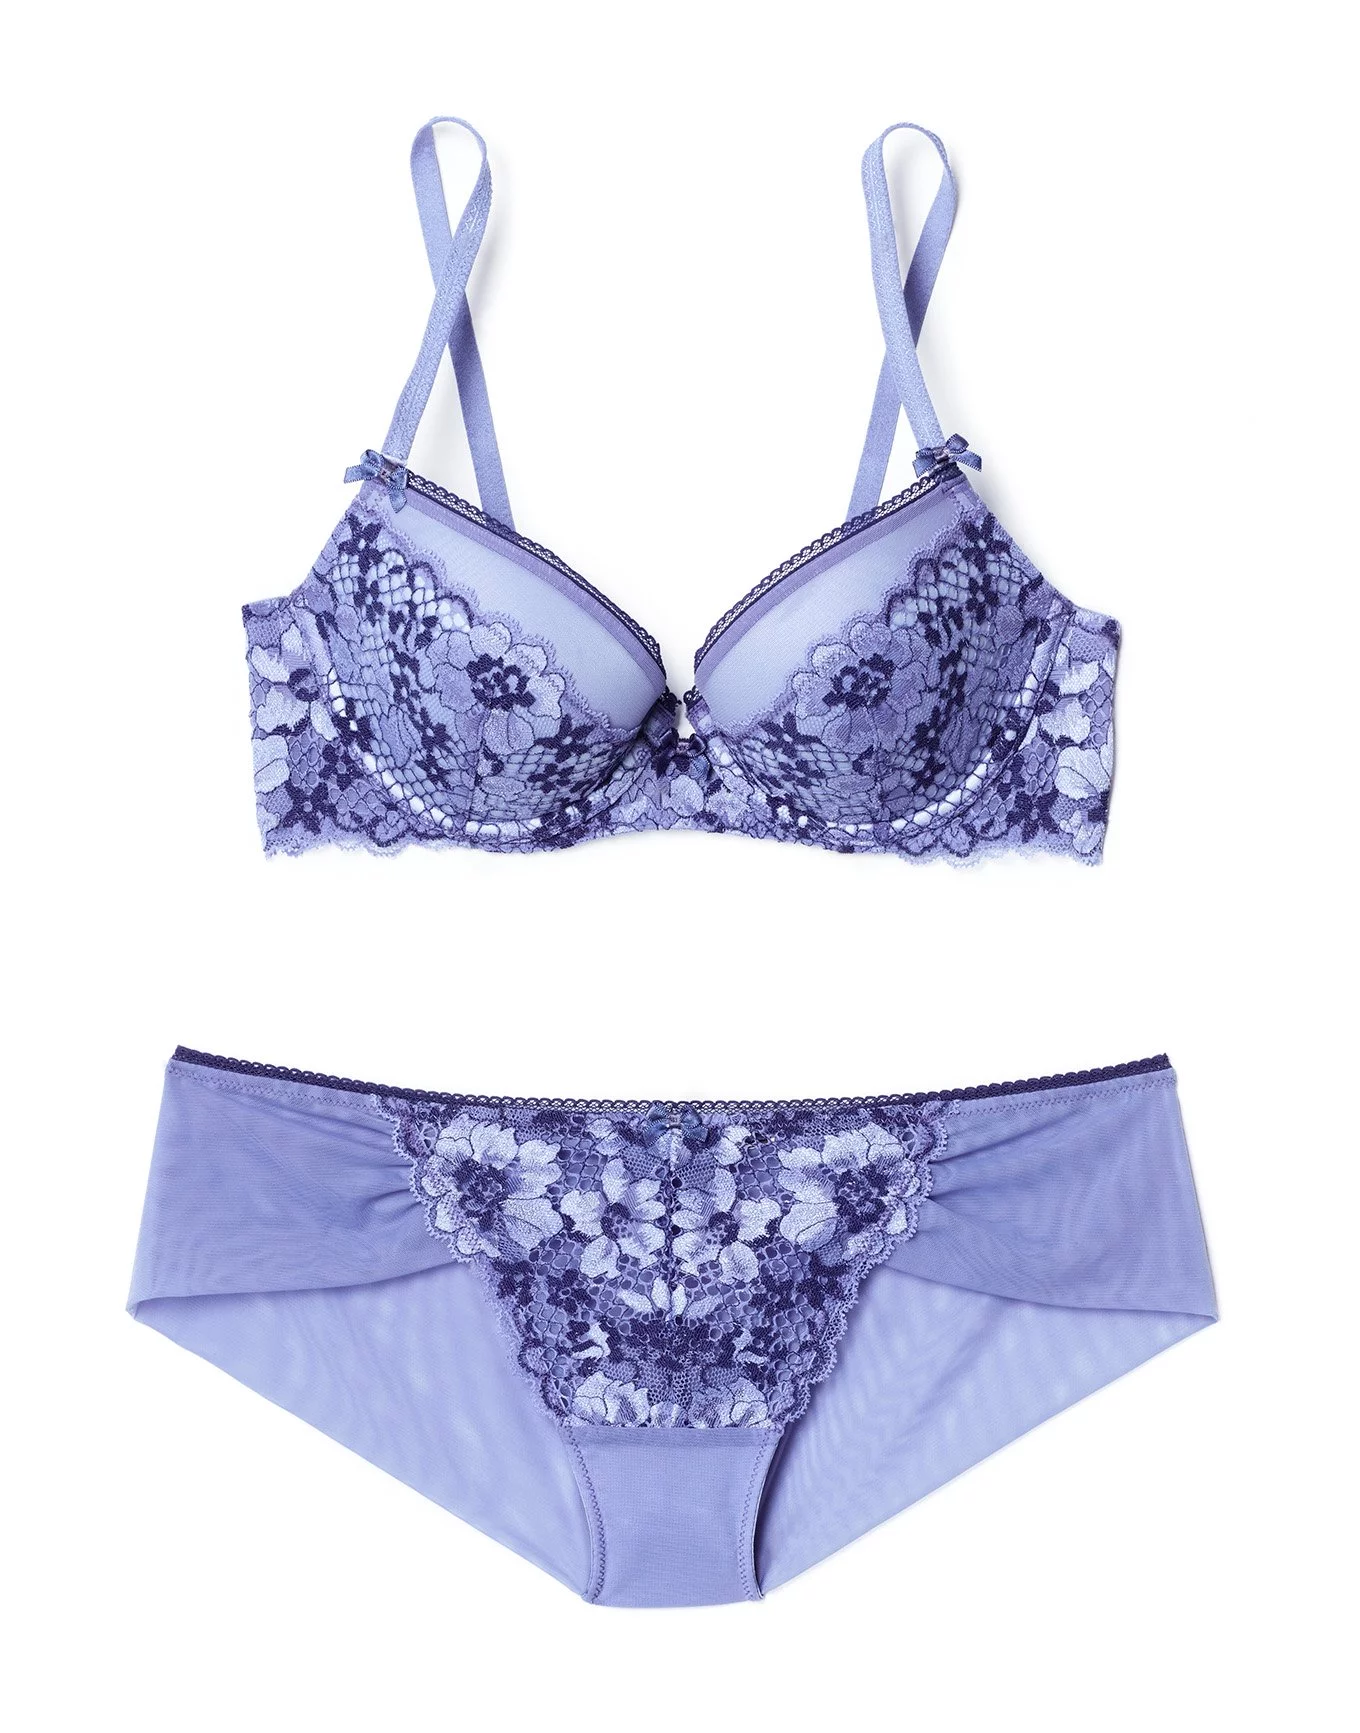 Buy online Purple Polyester Push Up Bra from lingerie for Women by Parkha  for ₹400 at 79% off